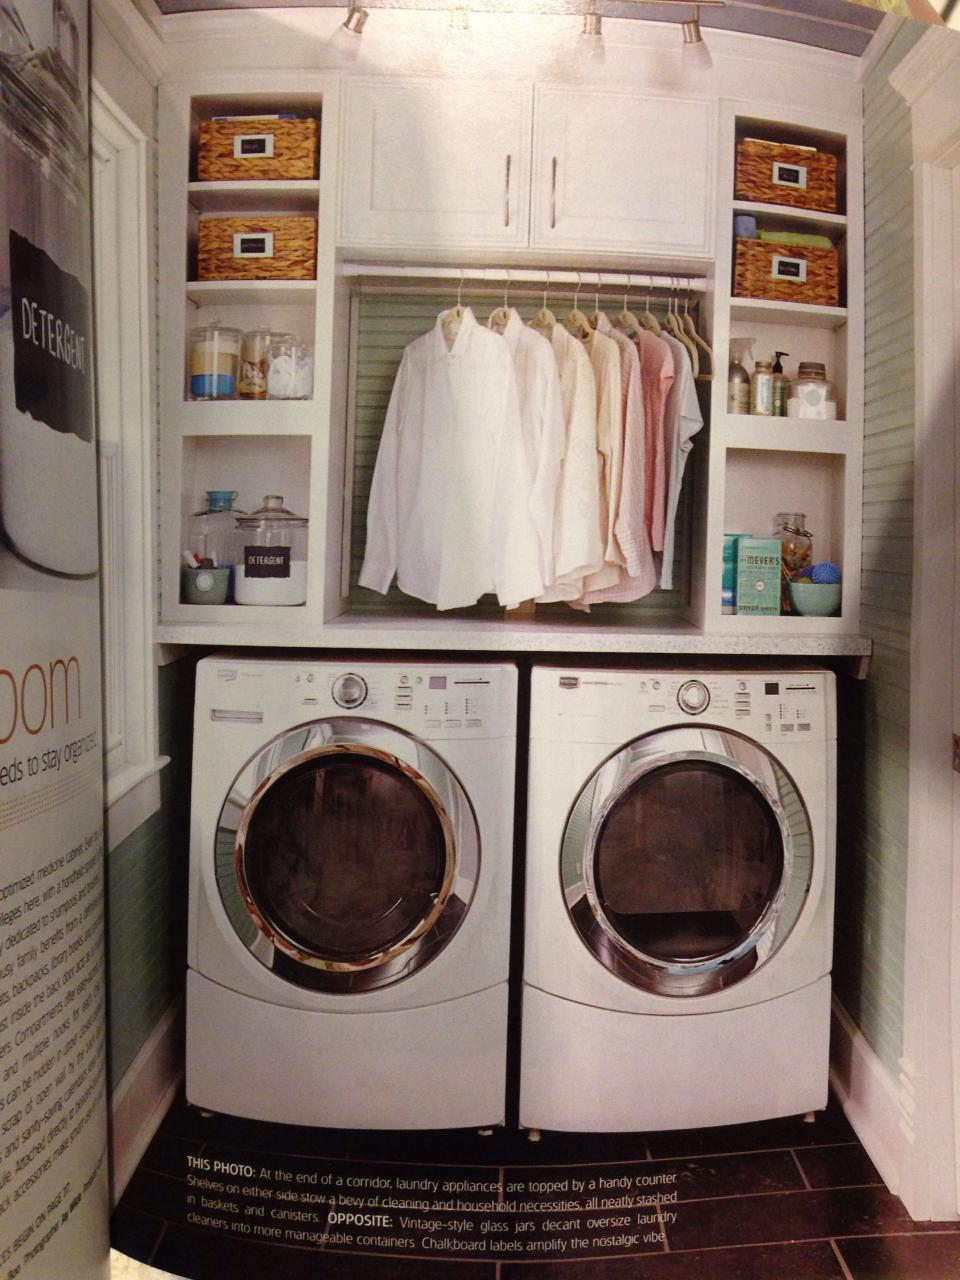 BuiltIn above the washer and dryer with baskets, canisters